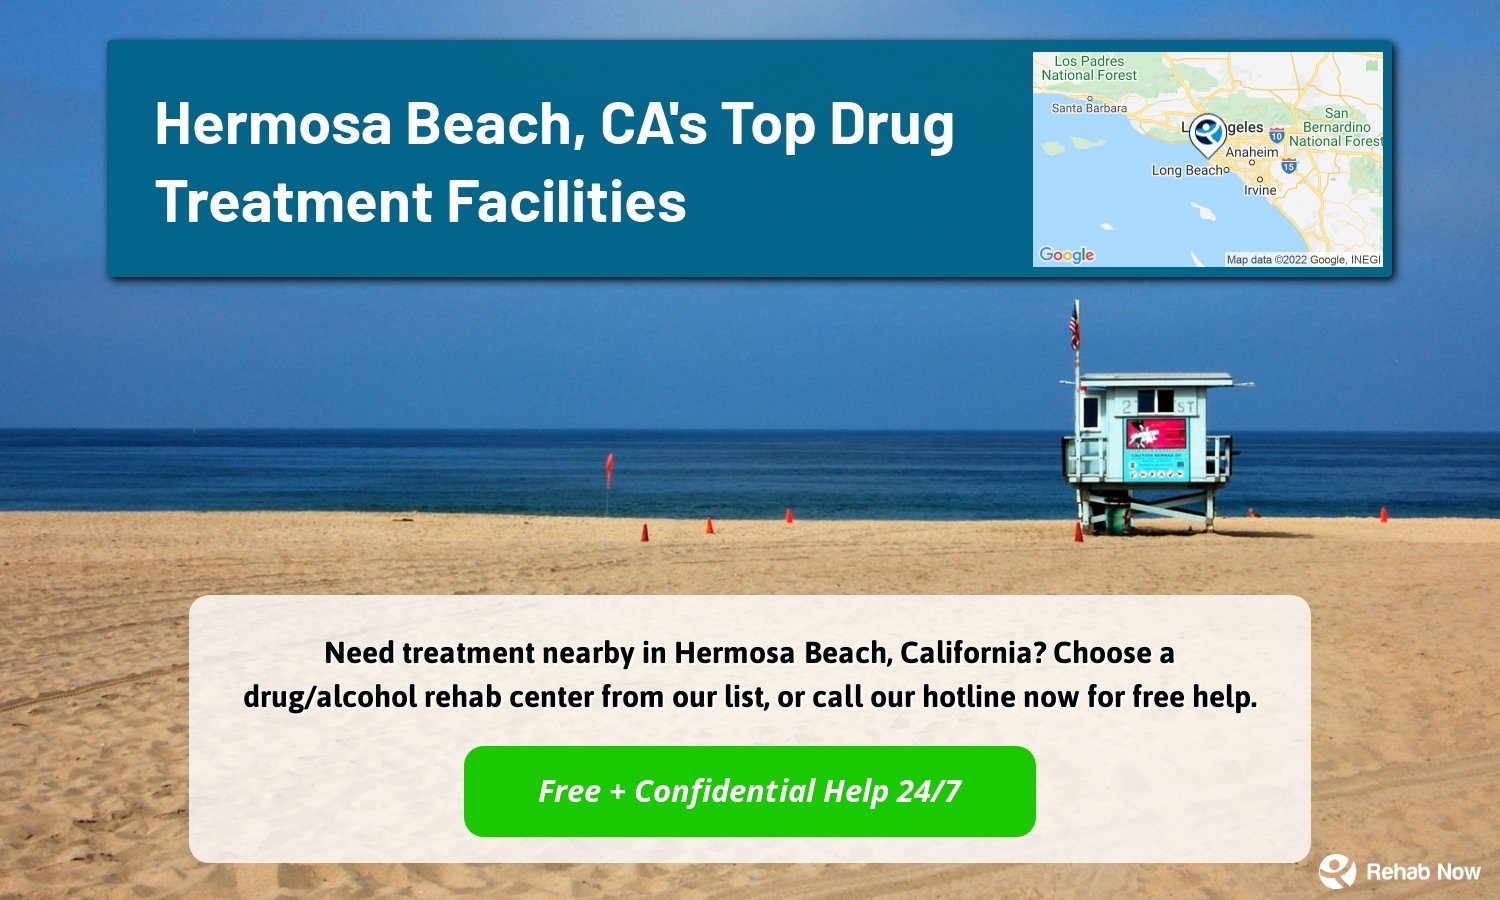 Need treatment nearby in Hermosa Beach, California? Choose a drug/alcohol rehab center from our list, or call our hotline now for free help.